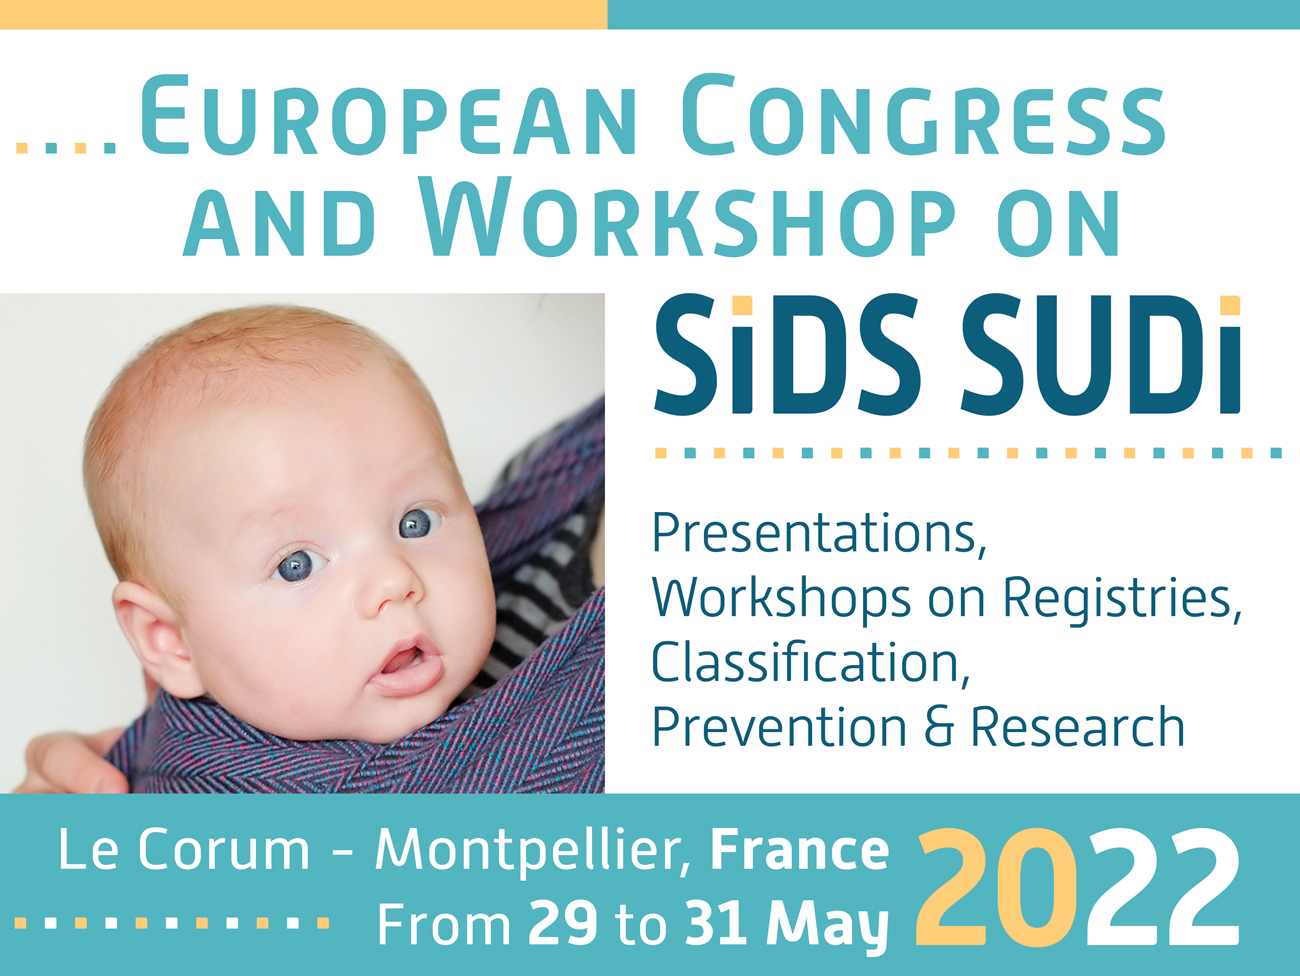 European congress on Sudden Infant Death Syndrome (SIDS) and Sudden Unexpected Death of Infancy (SUDI)